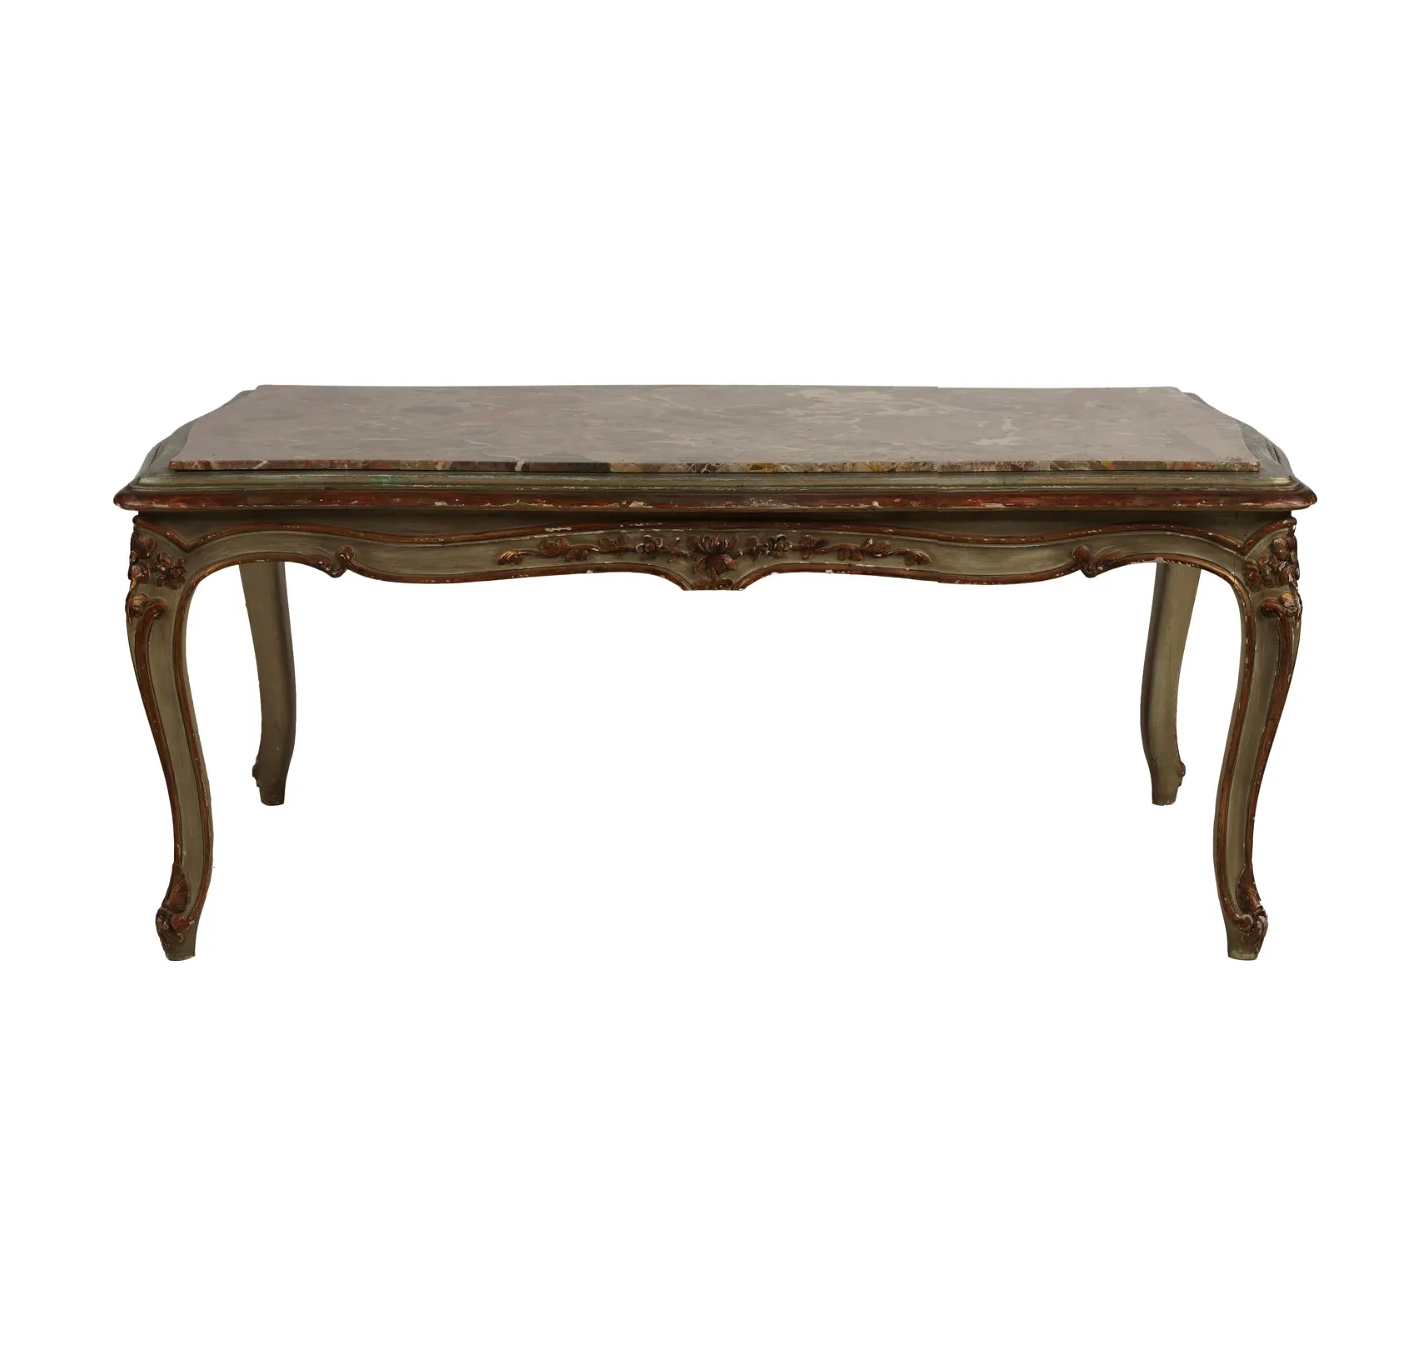 AF1-041: Early 20th Century Rococo Style & Gilt Coffee Table w/ Marble Top